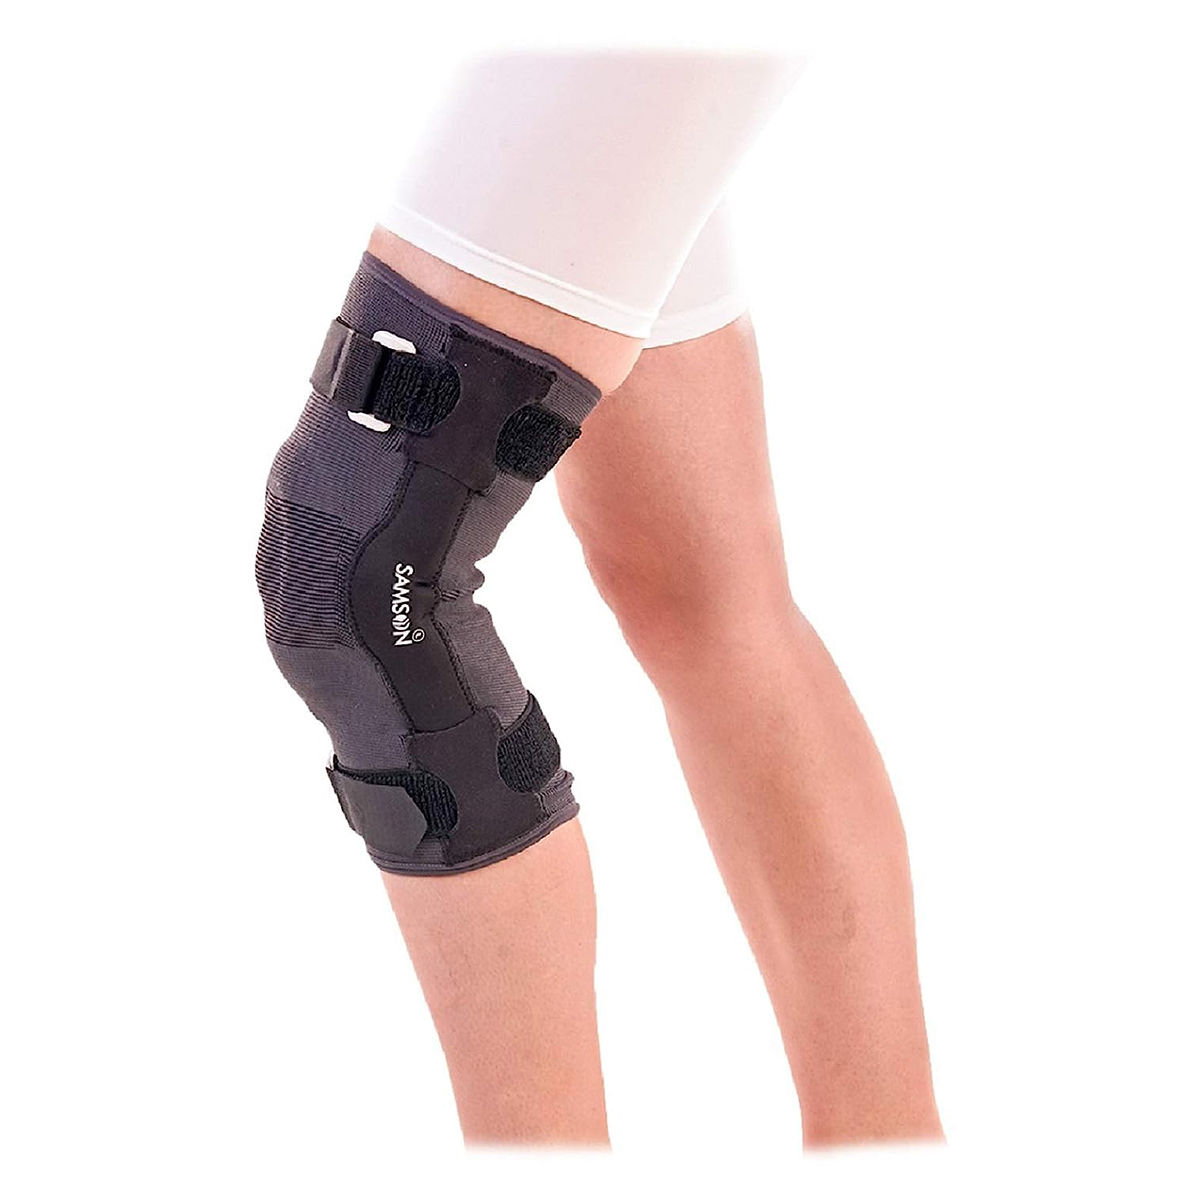 Buy SAMSON Knee Cap(Open Patella Gel Pad)(Single) for Knee Support(M,Beige)  Online at Low Prices in India 